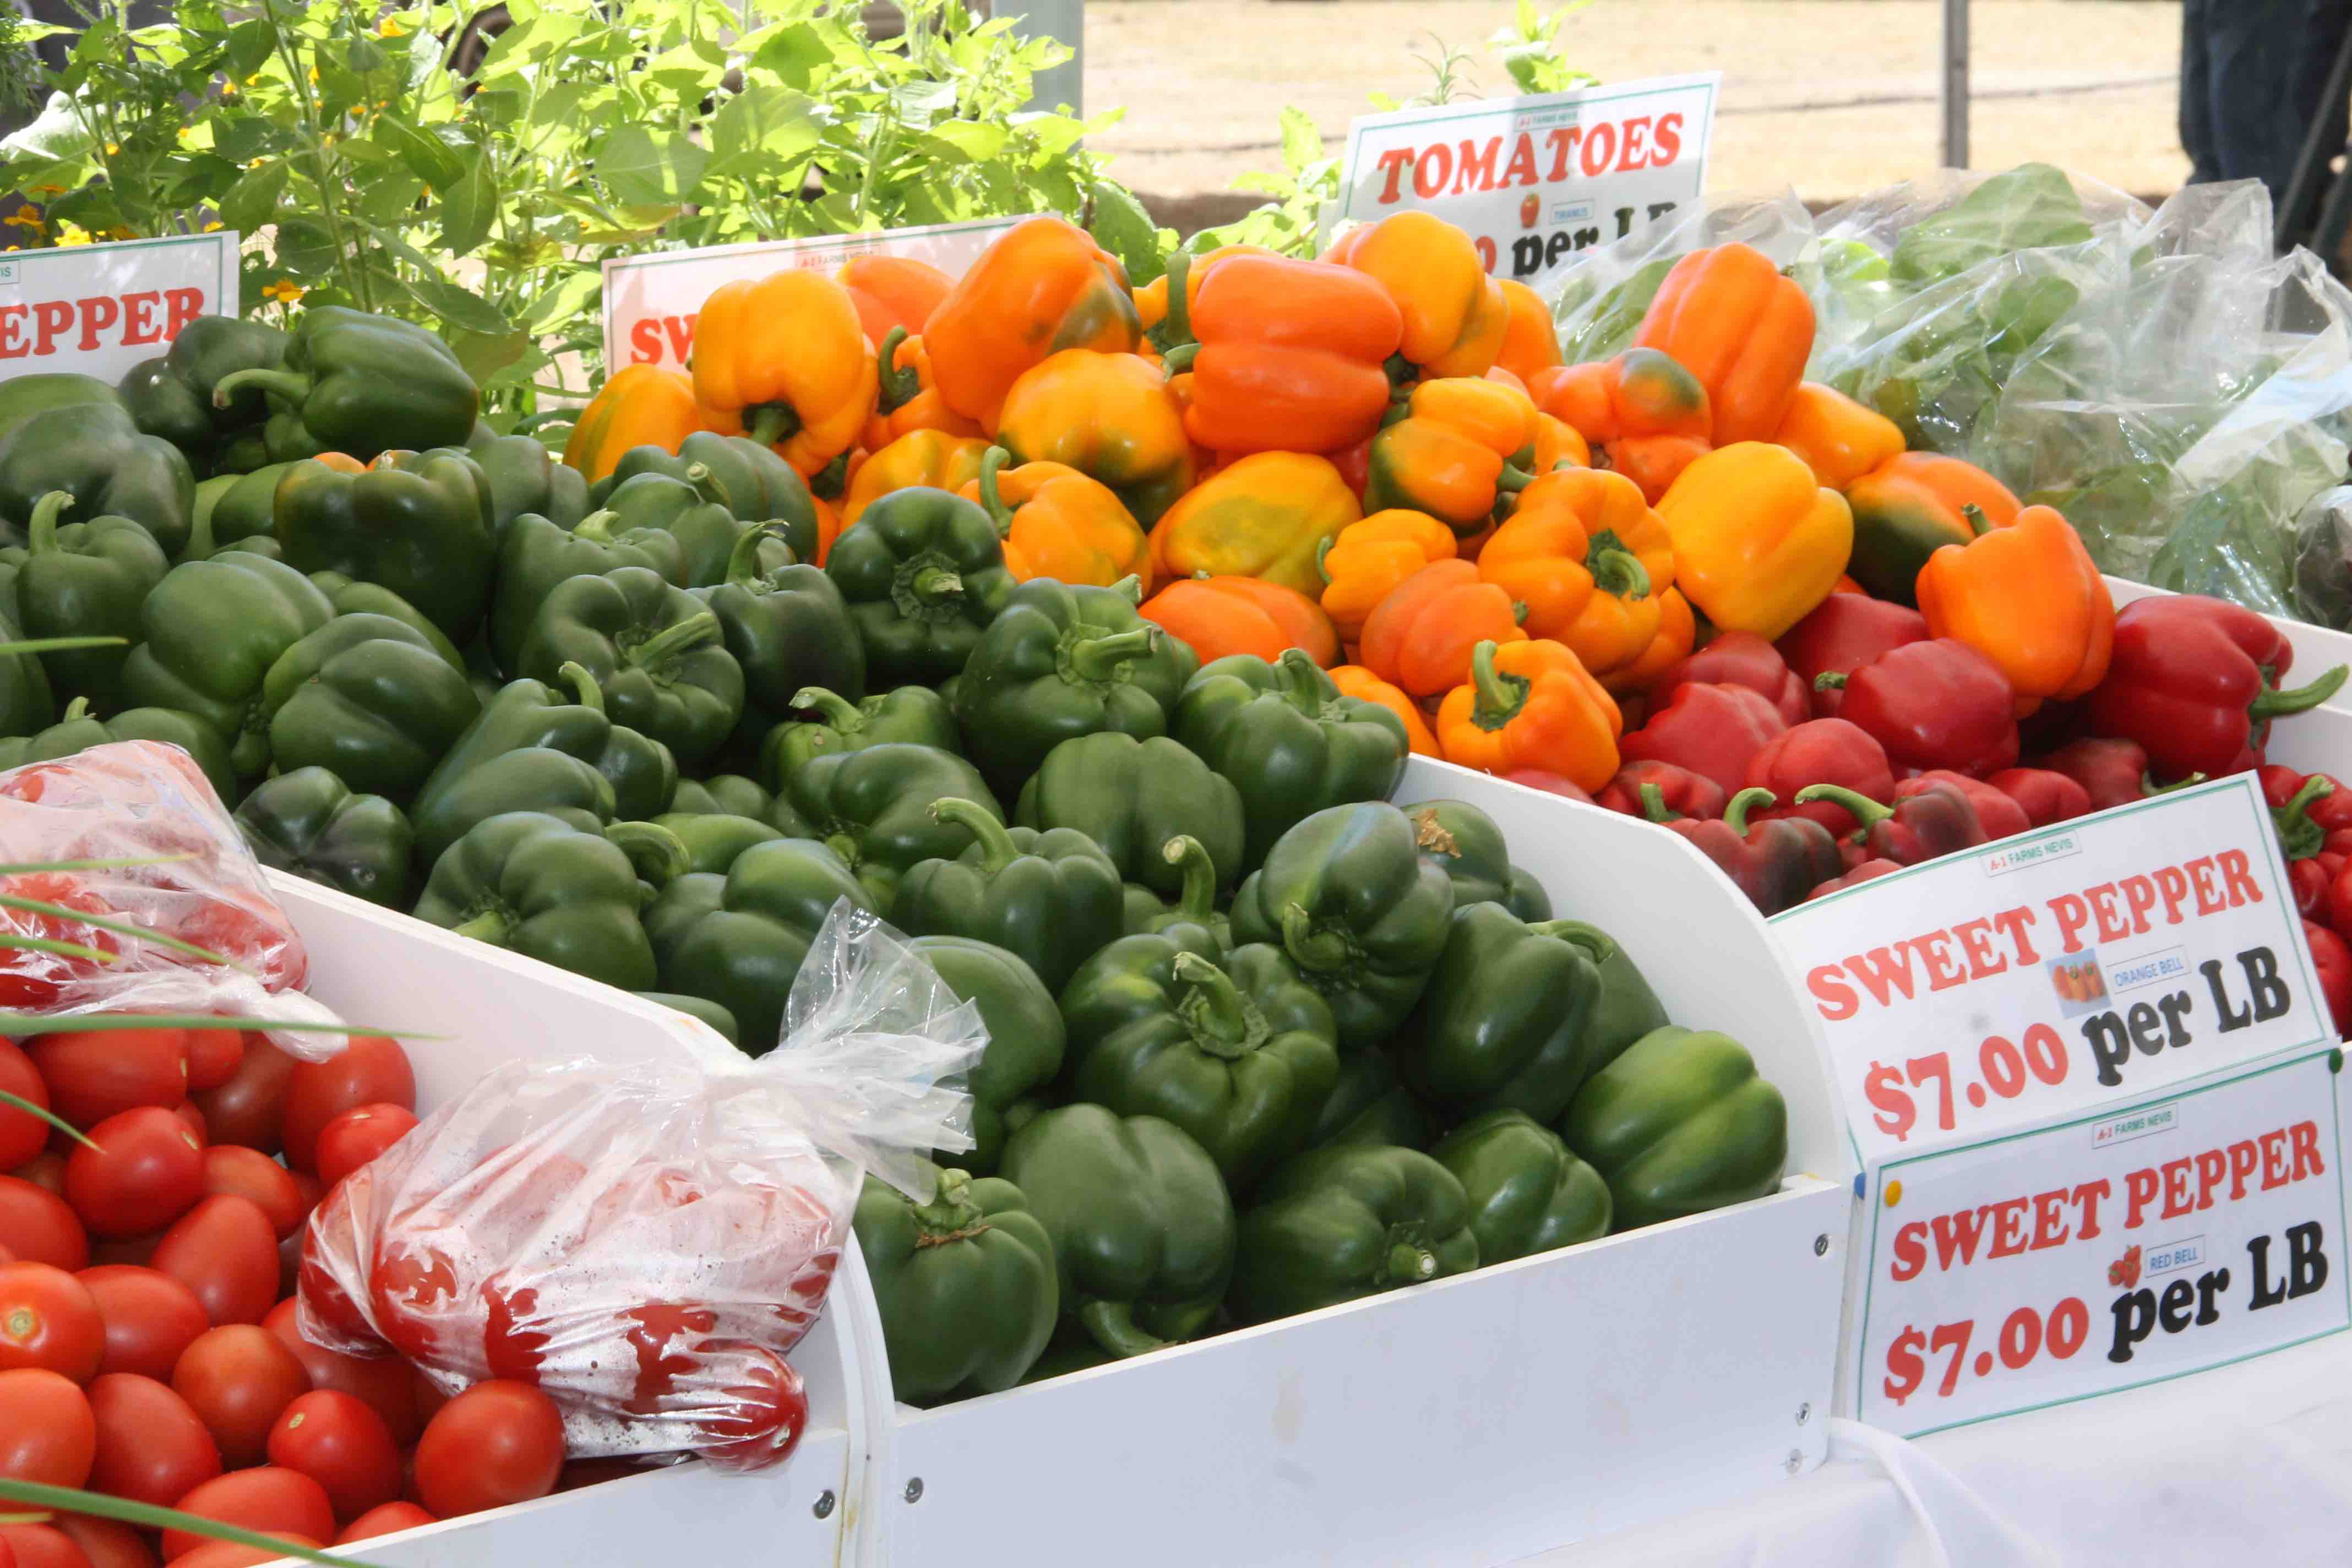 Tomatoes and sweet peppers grown on Nevis (file photo)